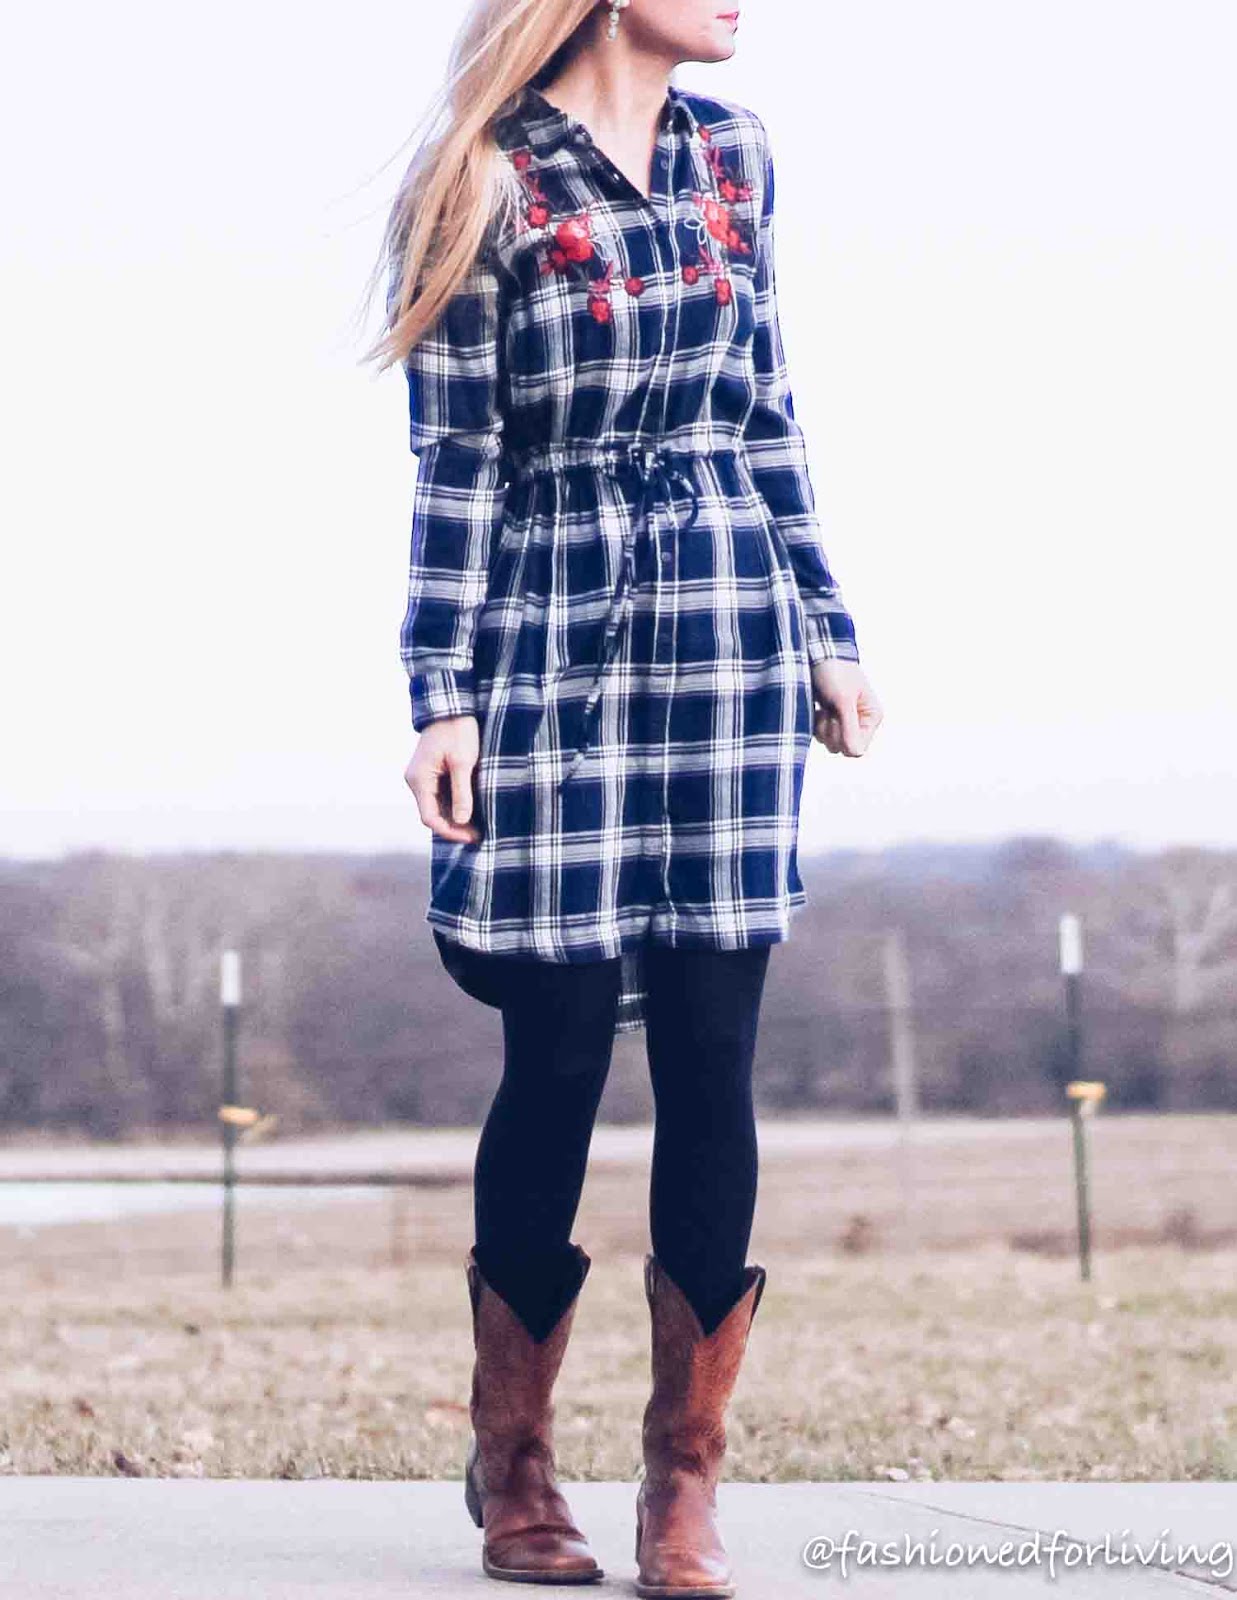 dresses with cowboy boots 2019